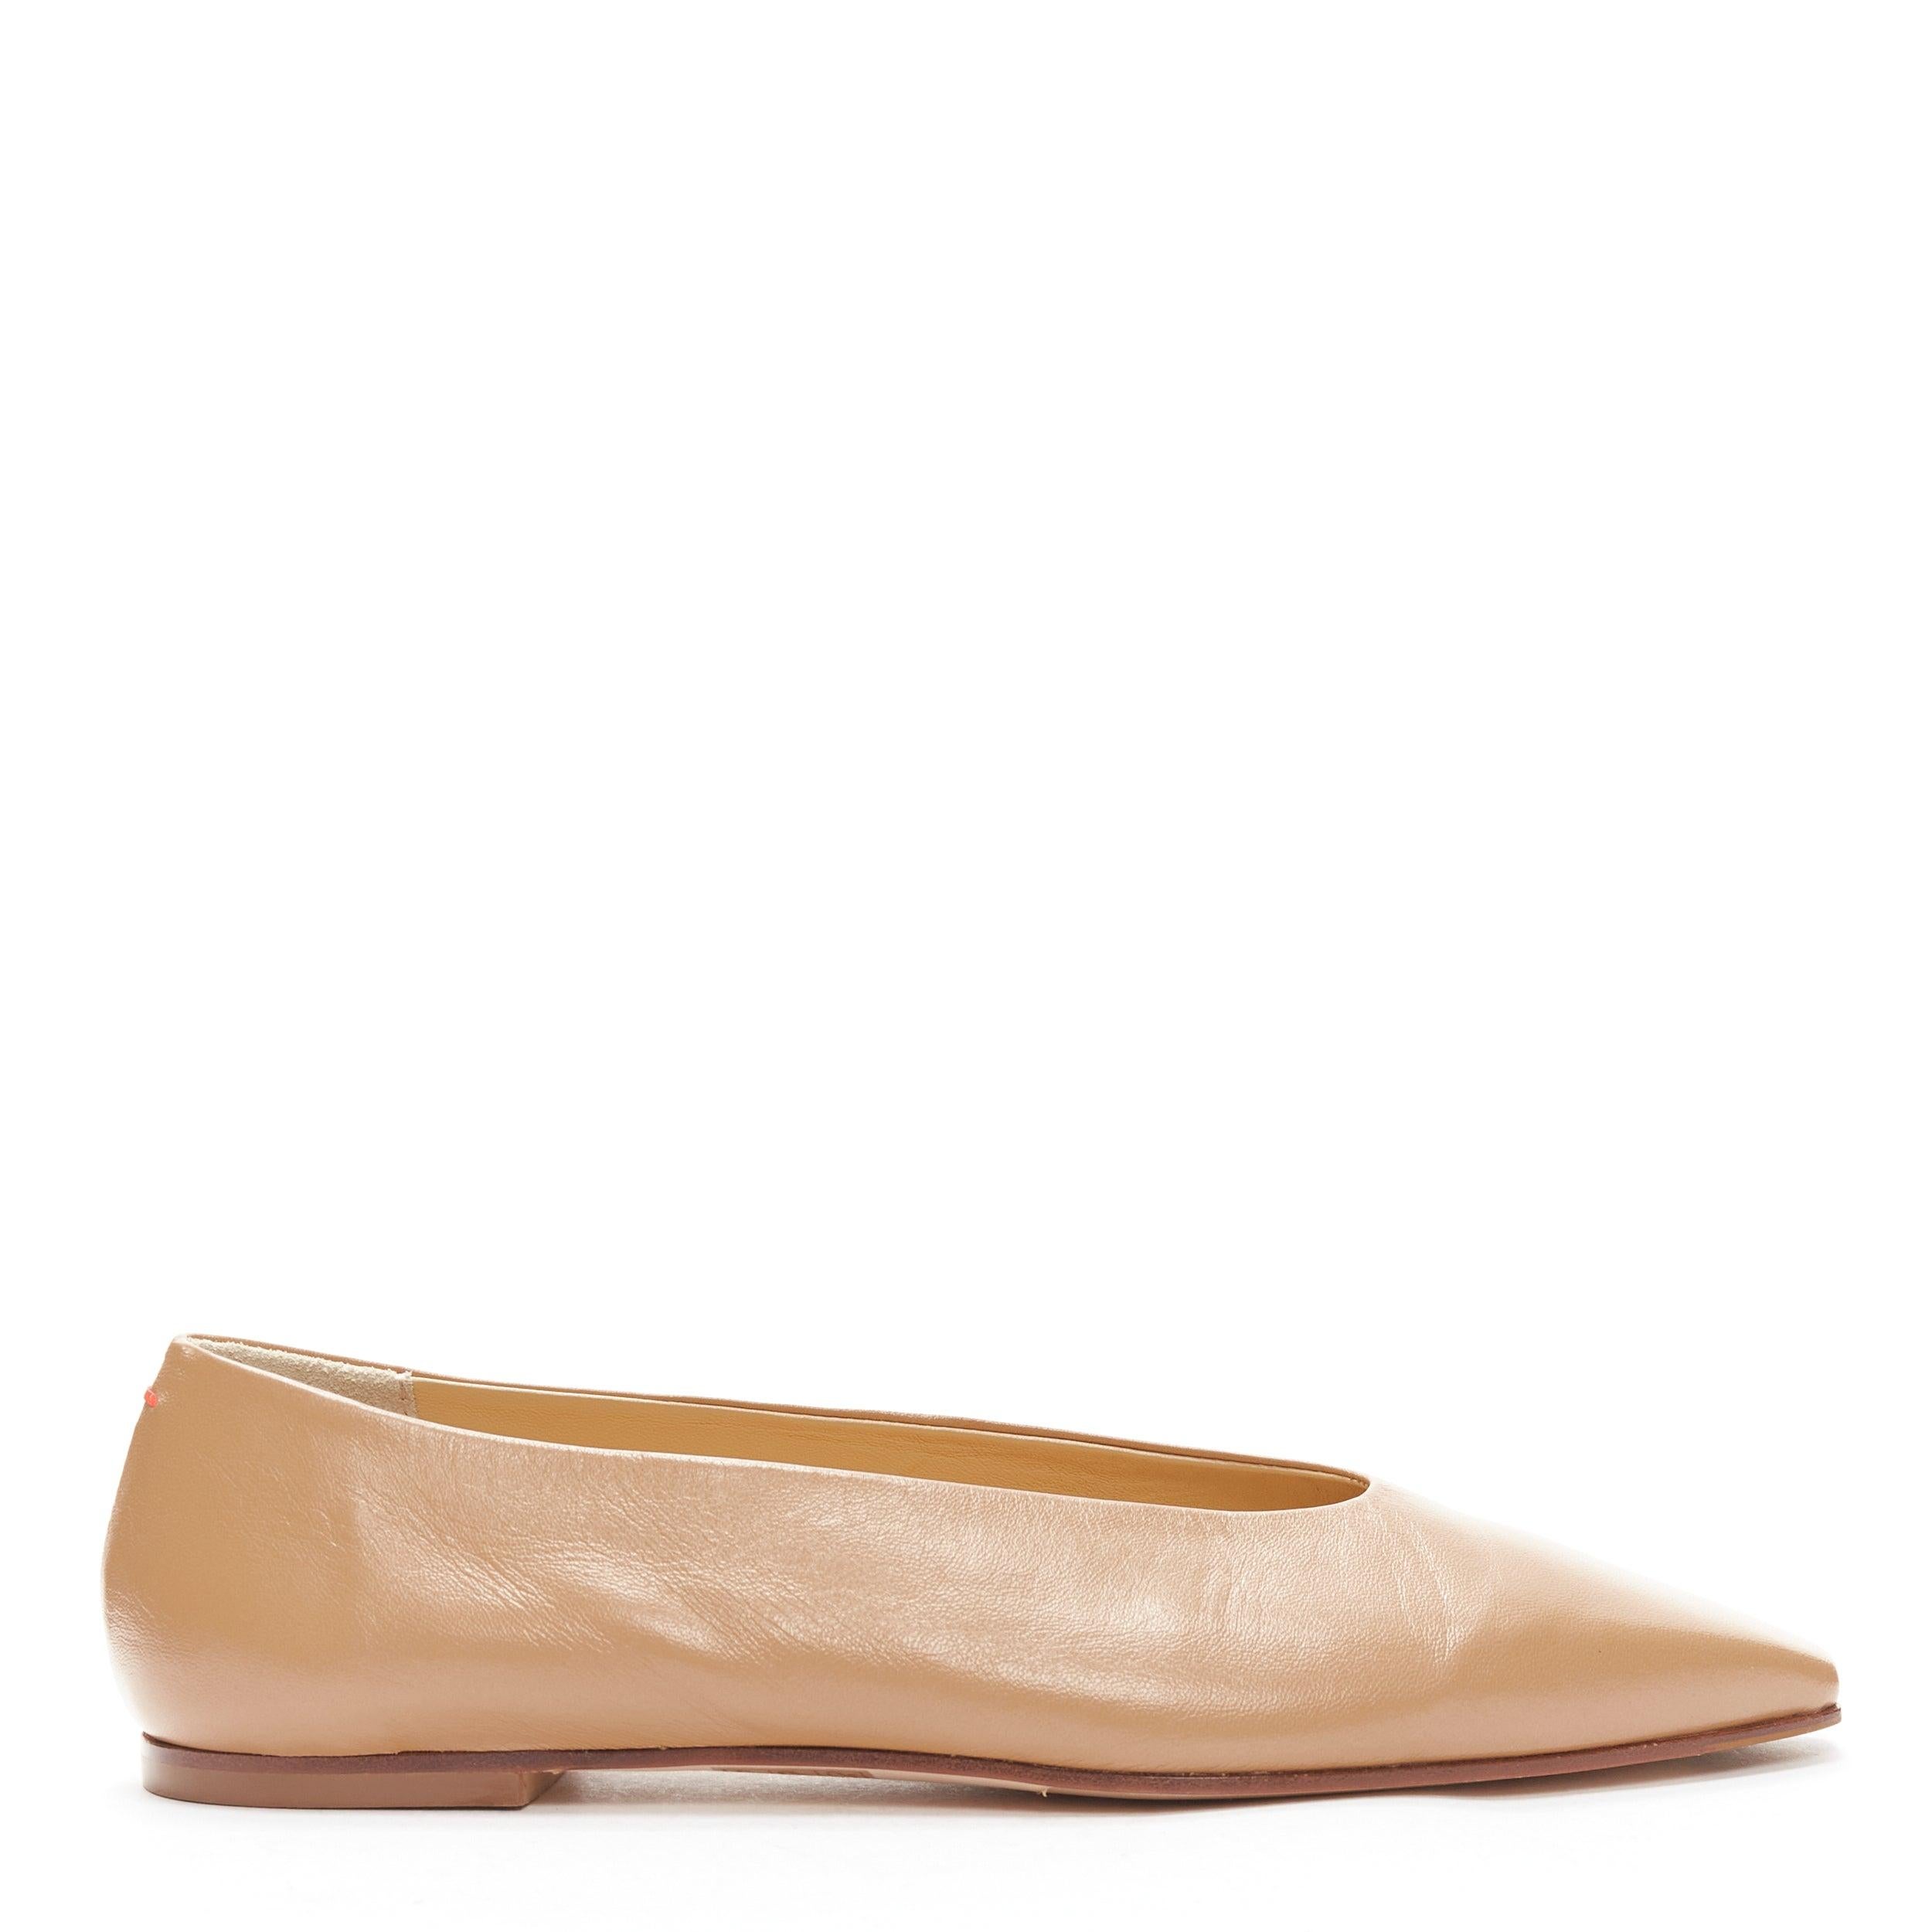 new AEYDE nude smooth leather square toe ballet flats EU37
Reference: SNKO/A00376
Brand: Aeyde
Material: Leather
Color: Nude
Pattern: Solid
Closure: Slip On
Lining: Nude Leather
Extra Details: Hazelnut brown leather Moa pointed-toe ballerinas from